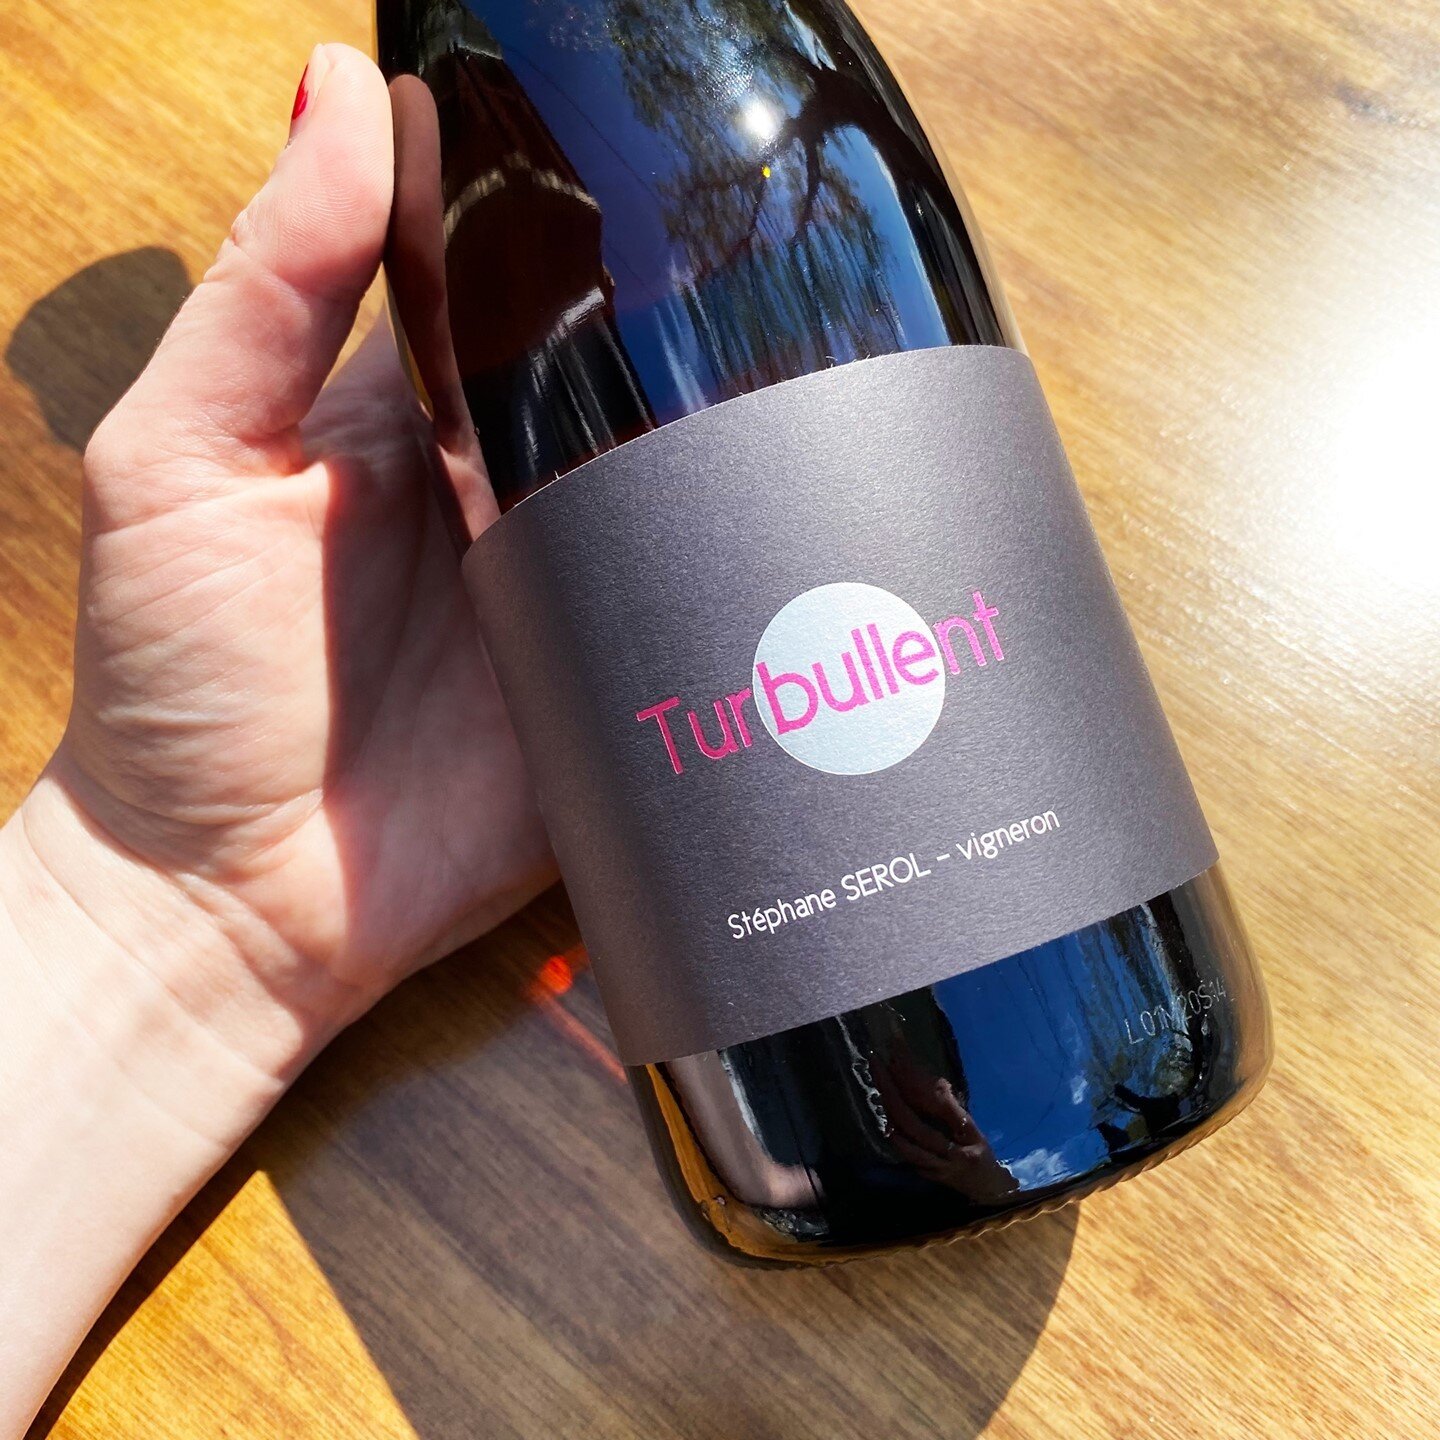 🇫🇷 New Release! 🇫🇷 ⁠
⁠
🥂 NV Domaine S&eacute;rol &lsquo;Turbullent&rsquo; Pet-Nat Ros&eacute; 🥂⁠
⁠
From young vines in sandy soils. Certified organic &amp; biodynamic ❤️ ⁠
⁠
This hyper vivid pink ferments in concrete with indigenous yeasts to 7